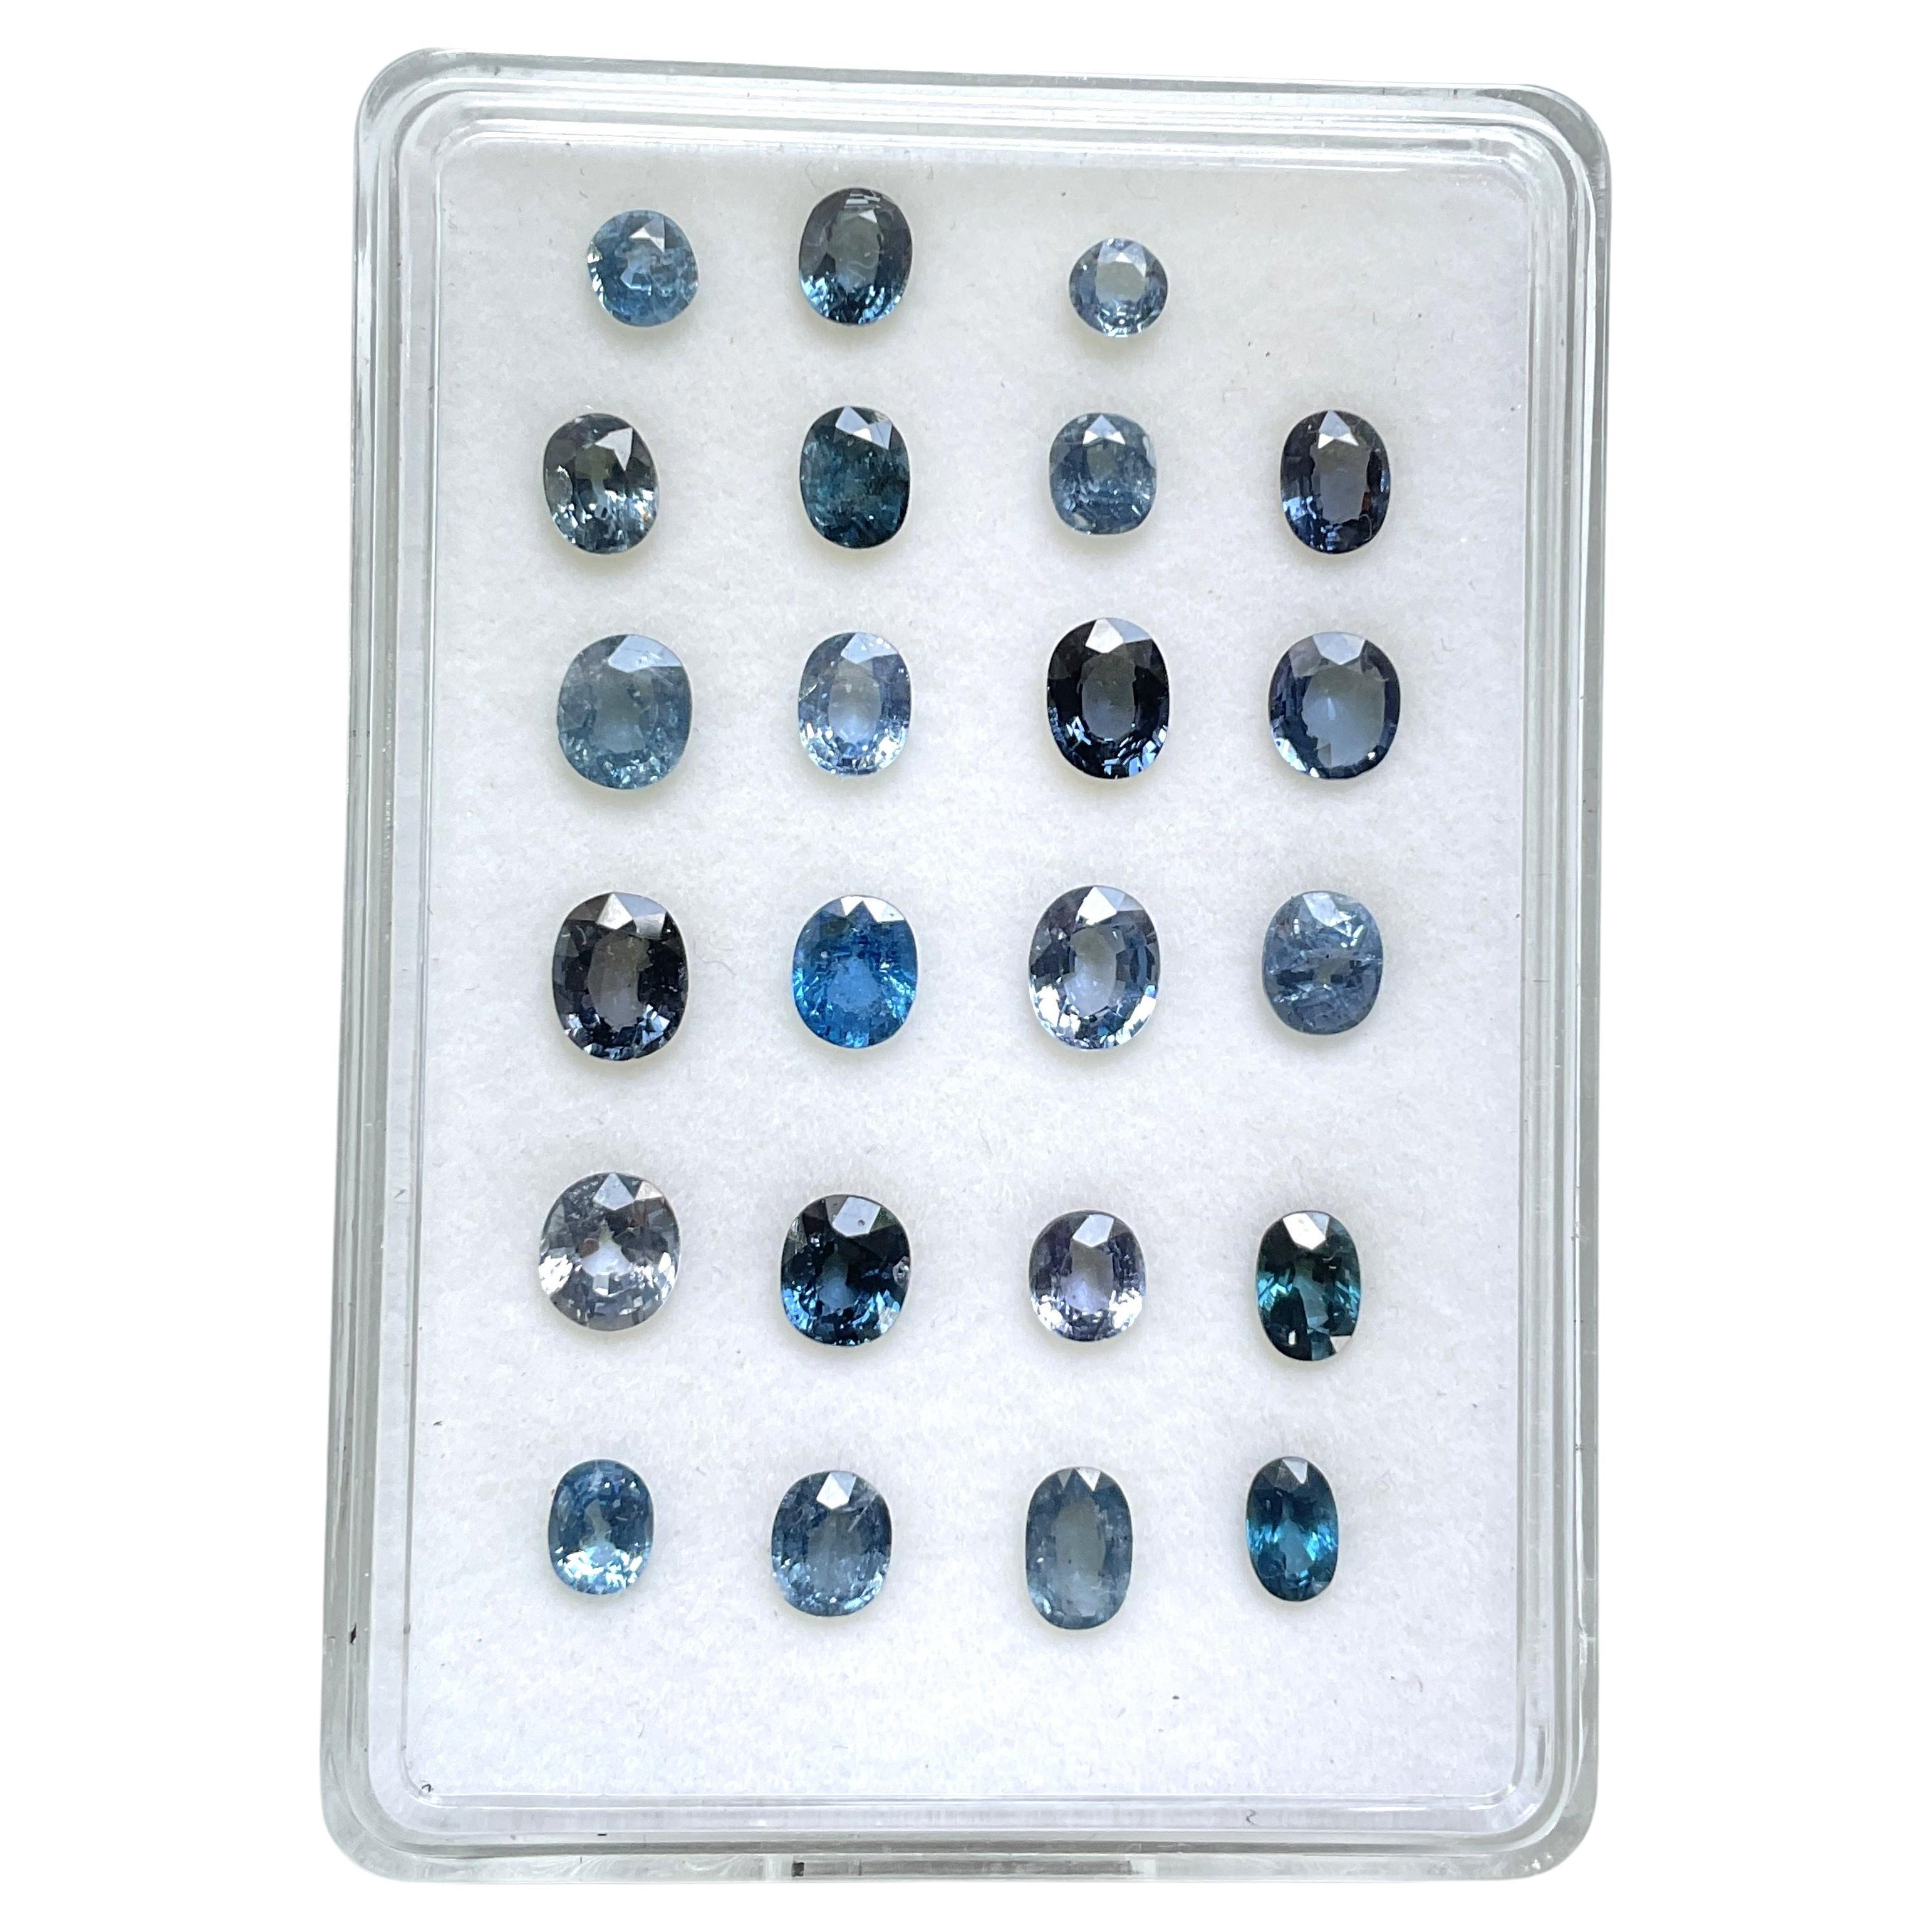 24.86 Carat Blue Spinel Tanzania Oval Faceted Natural Cut stone Fine Jewelry Gem For Sale